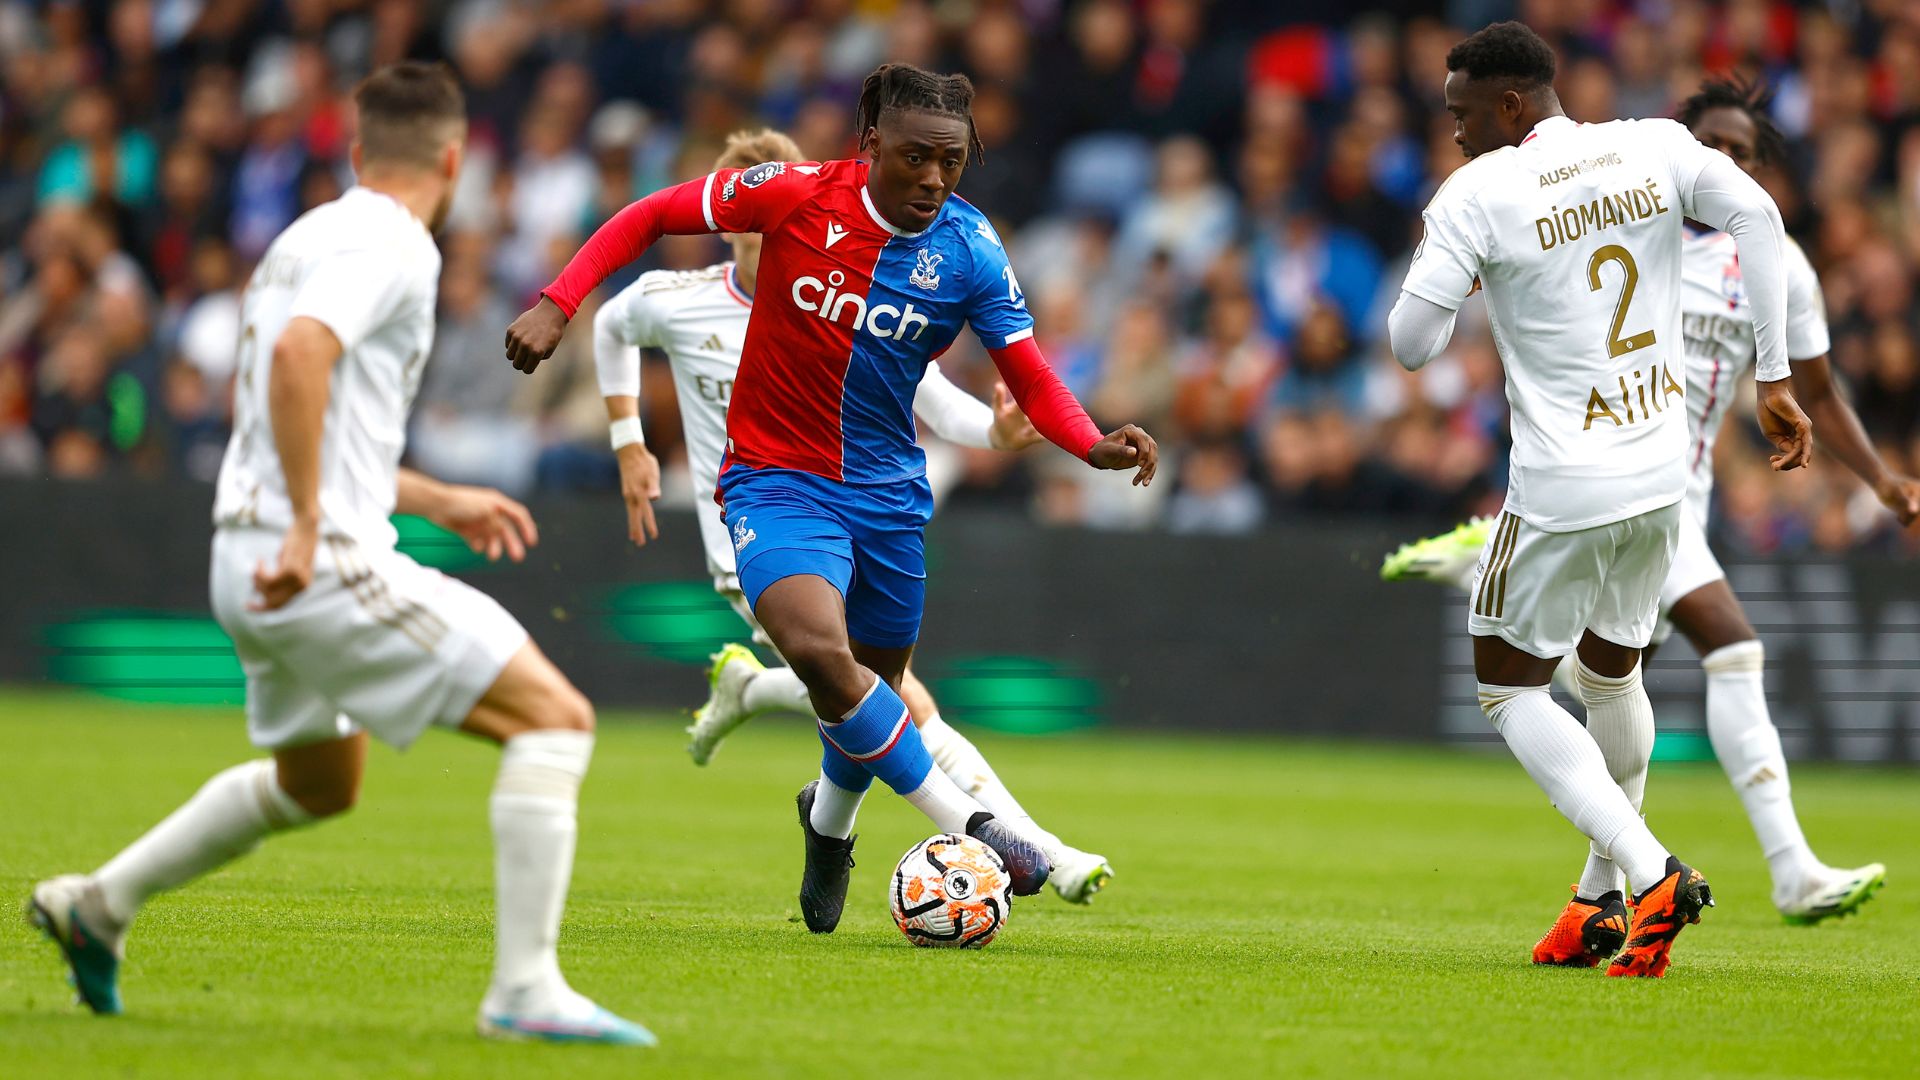 Friendly between Crystal Palace and Lyon, two teams managed by John Textor (Credit: Getty Images)